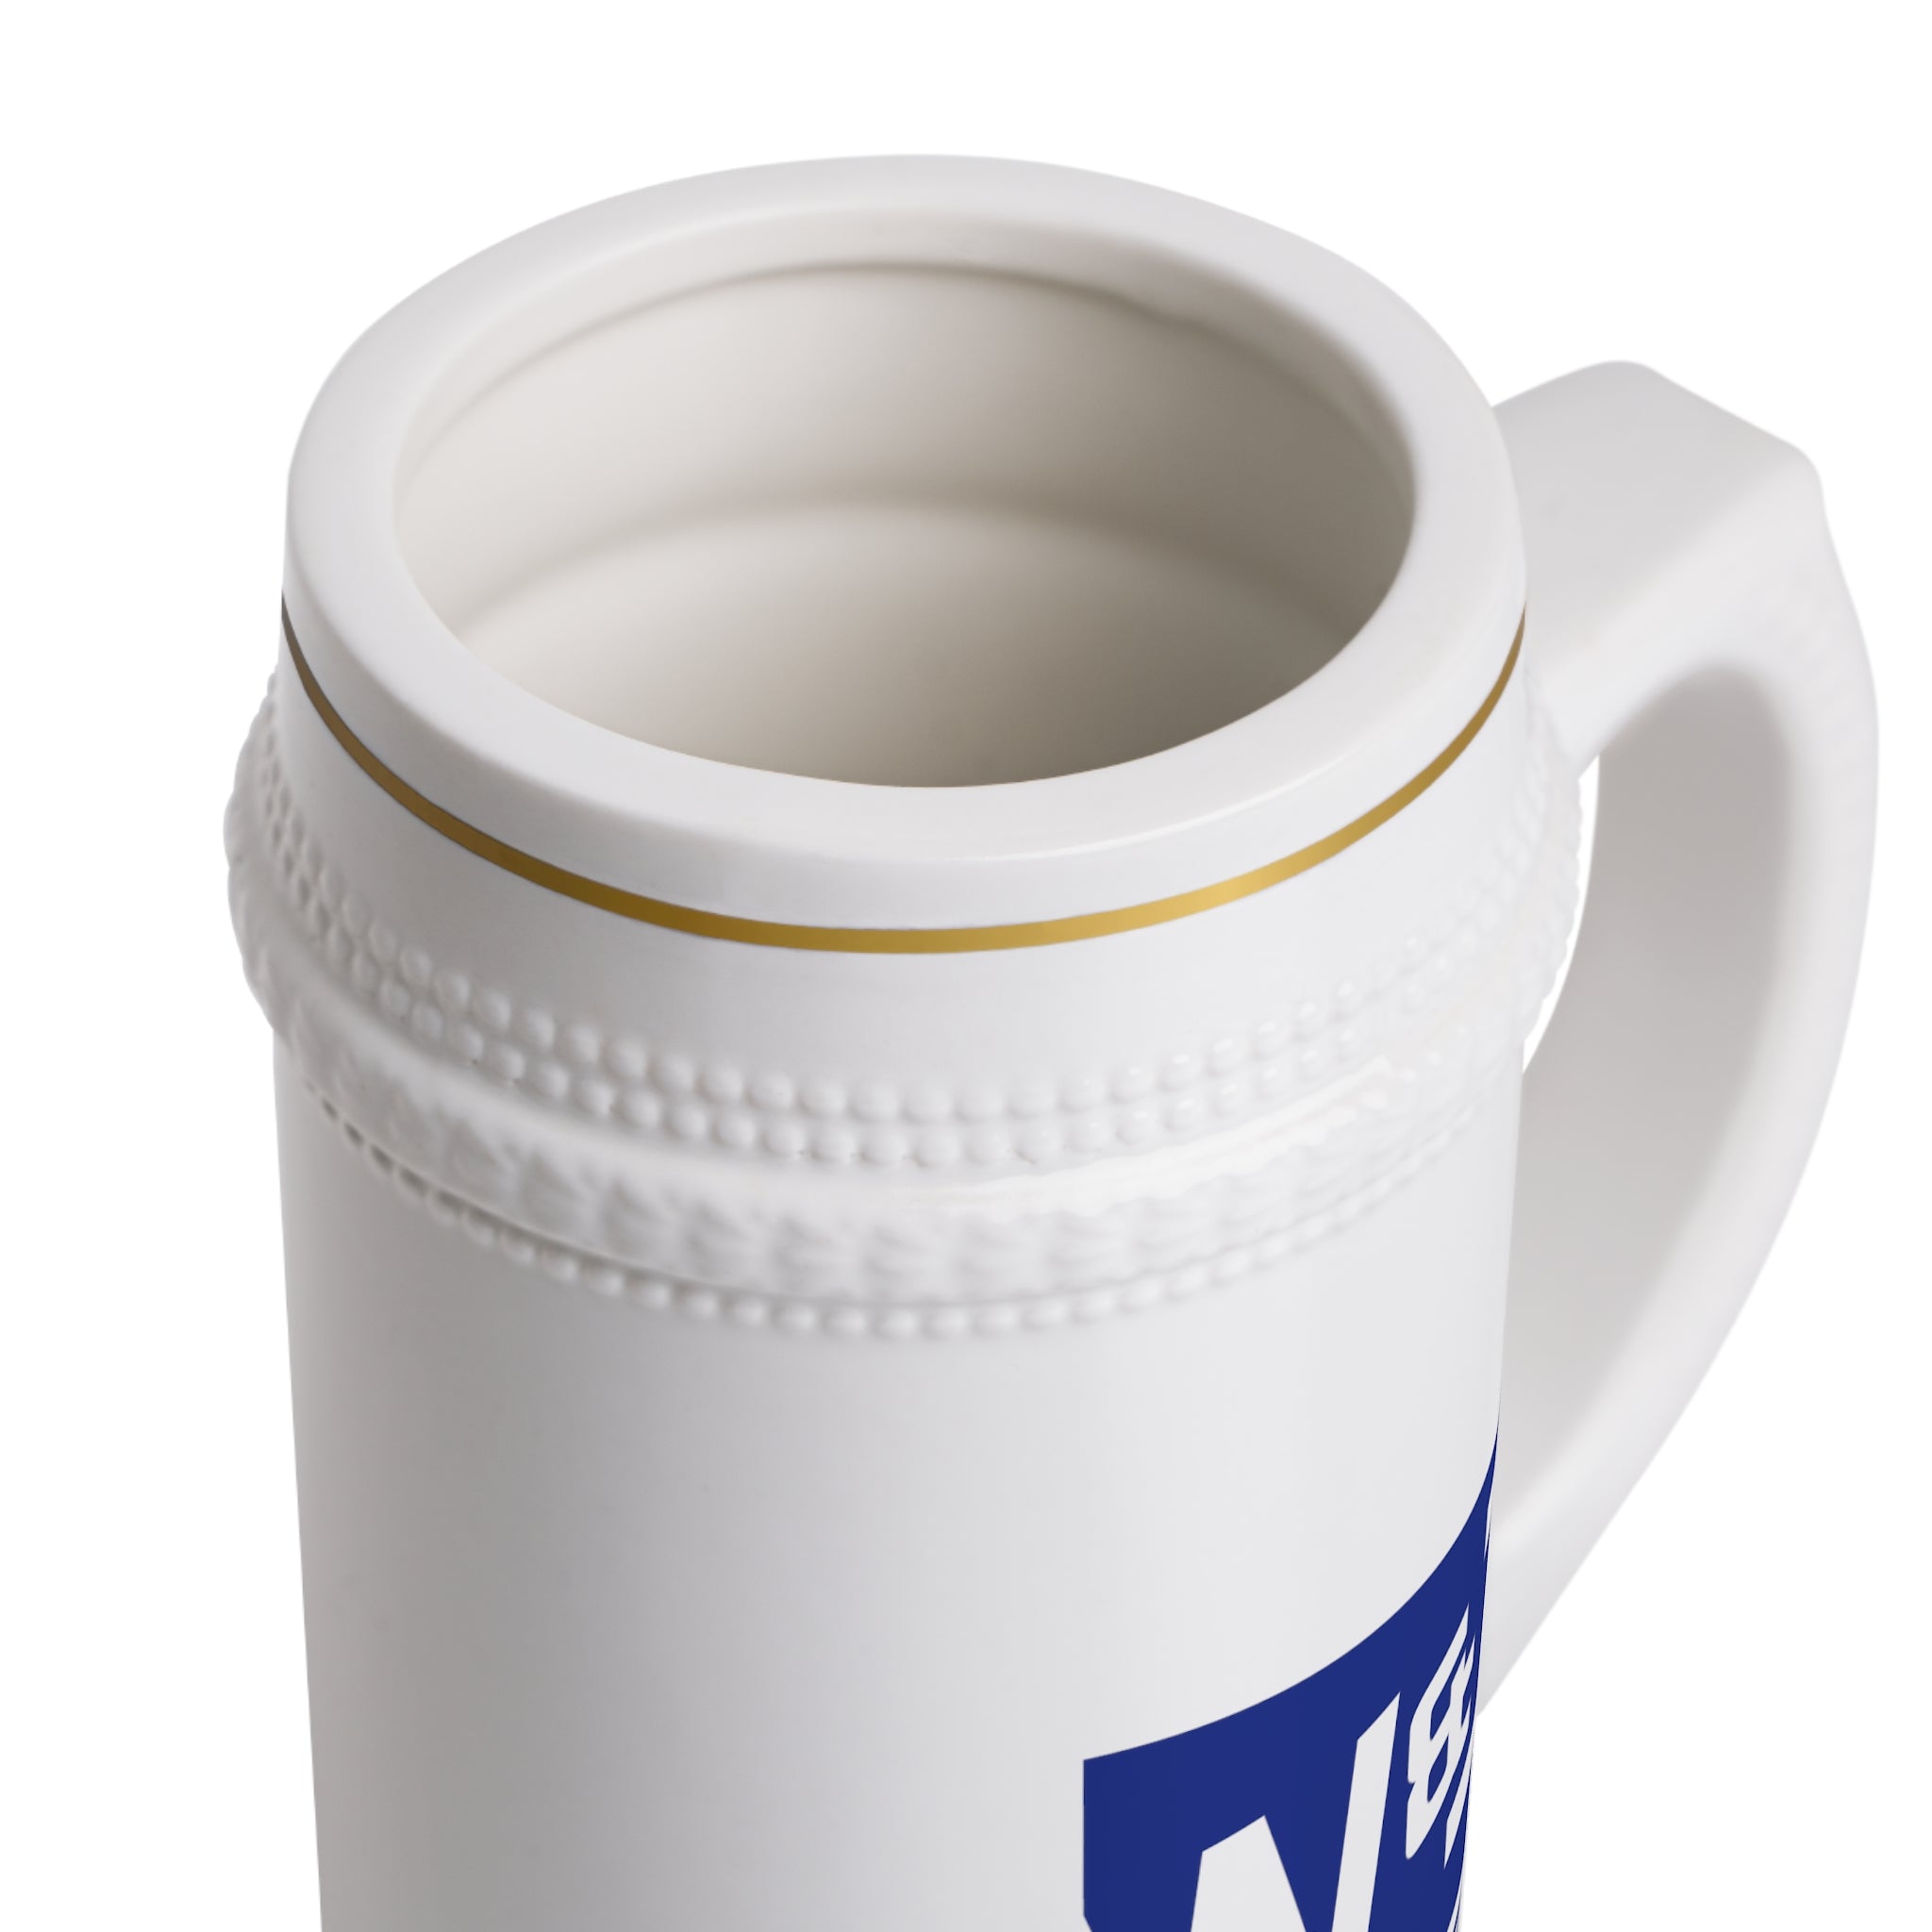 Less Government More Beer W&J Stein Mug